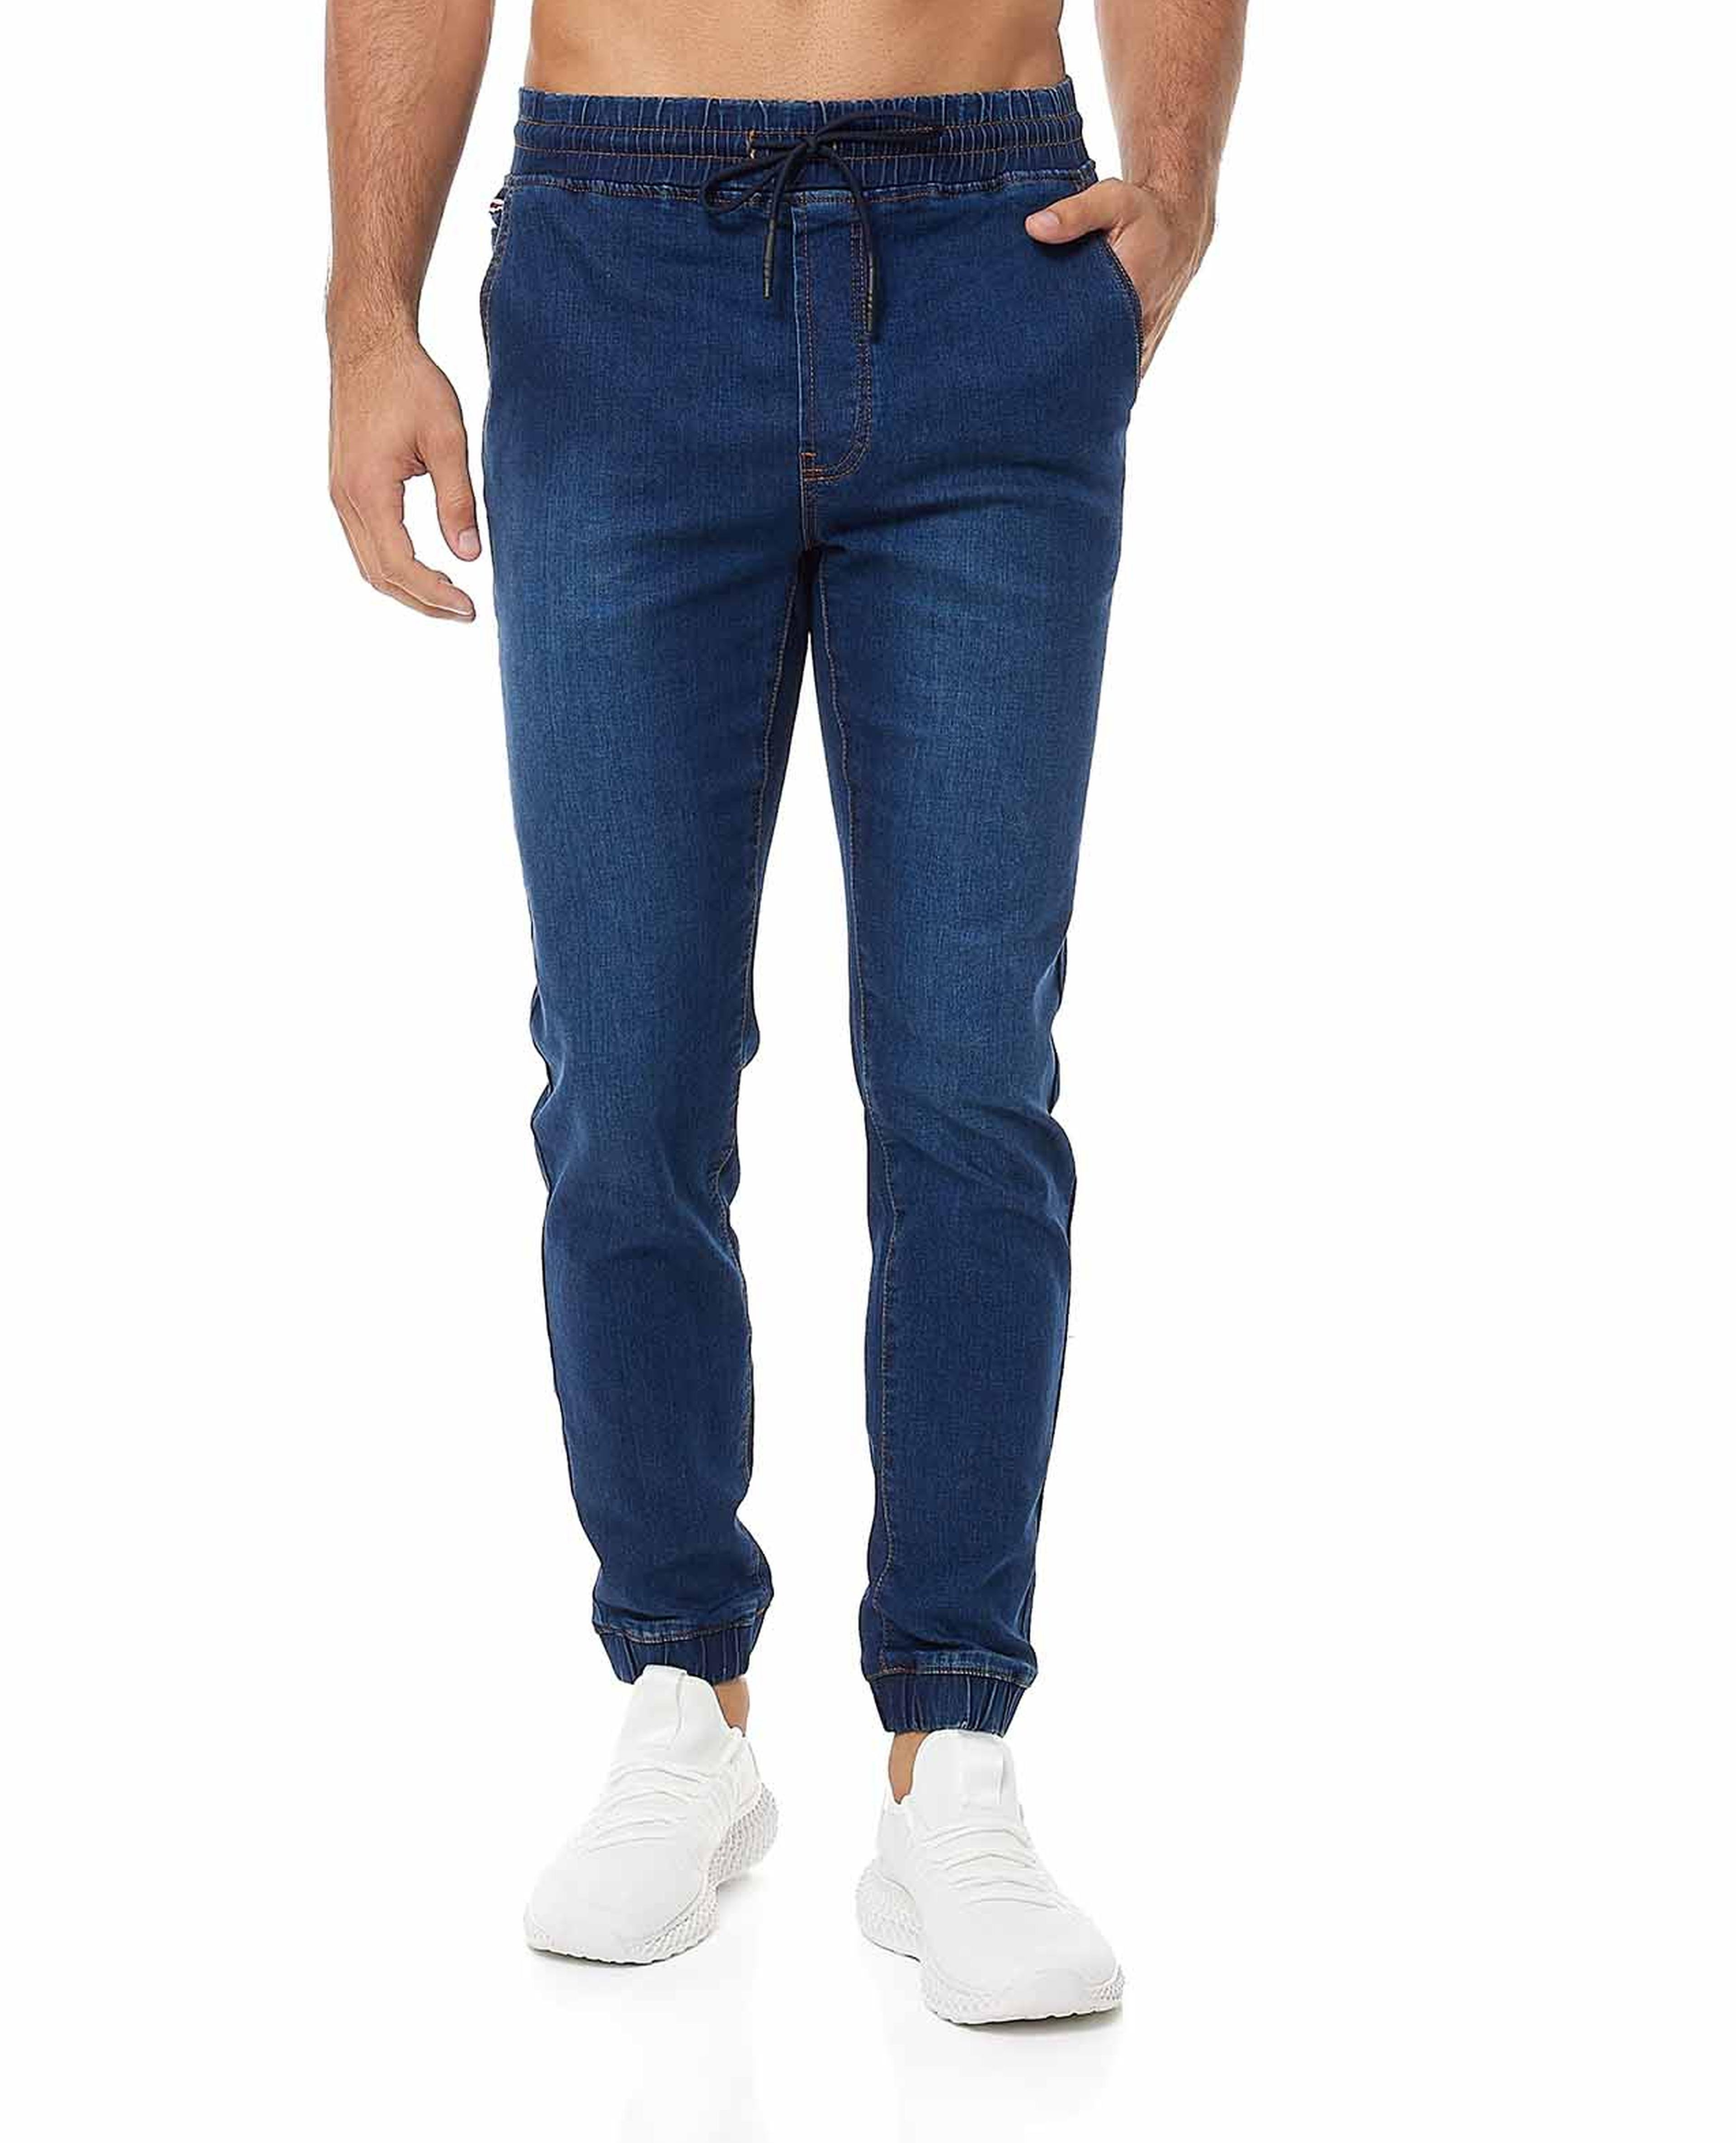 Solid Jogger Style Jeans with Drawstring Waist